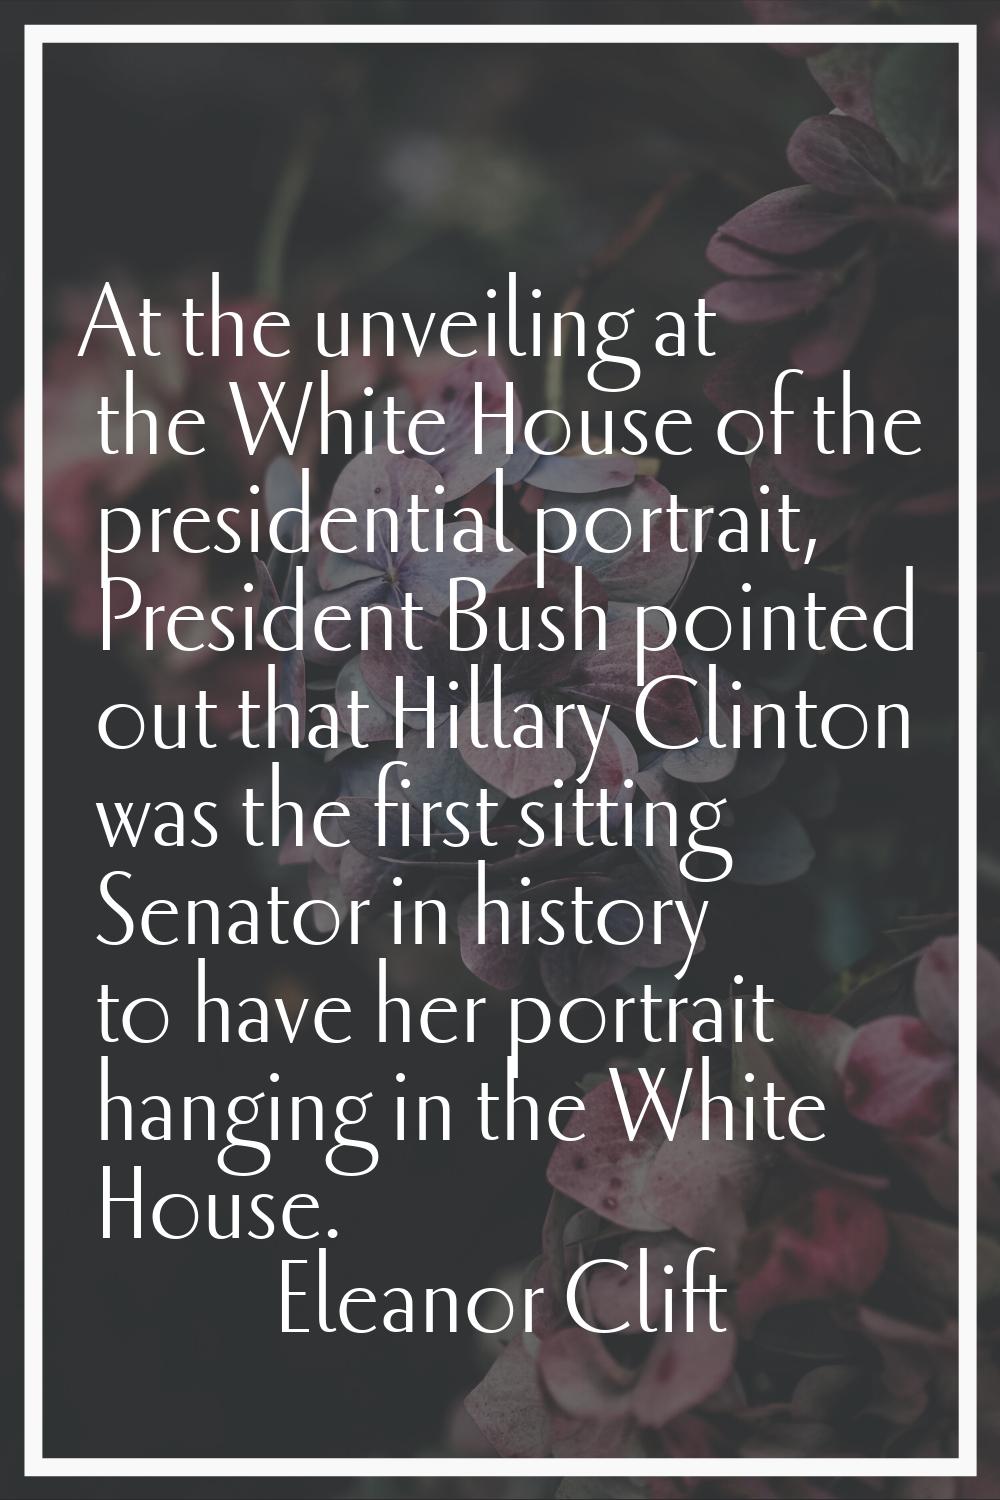 At the unveiling at the White House of the presidential portrait, President Bush pointed out that H